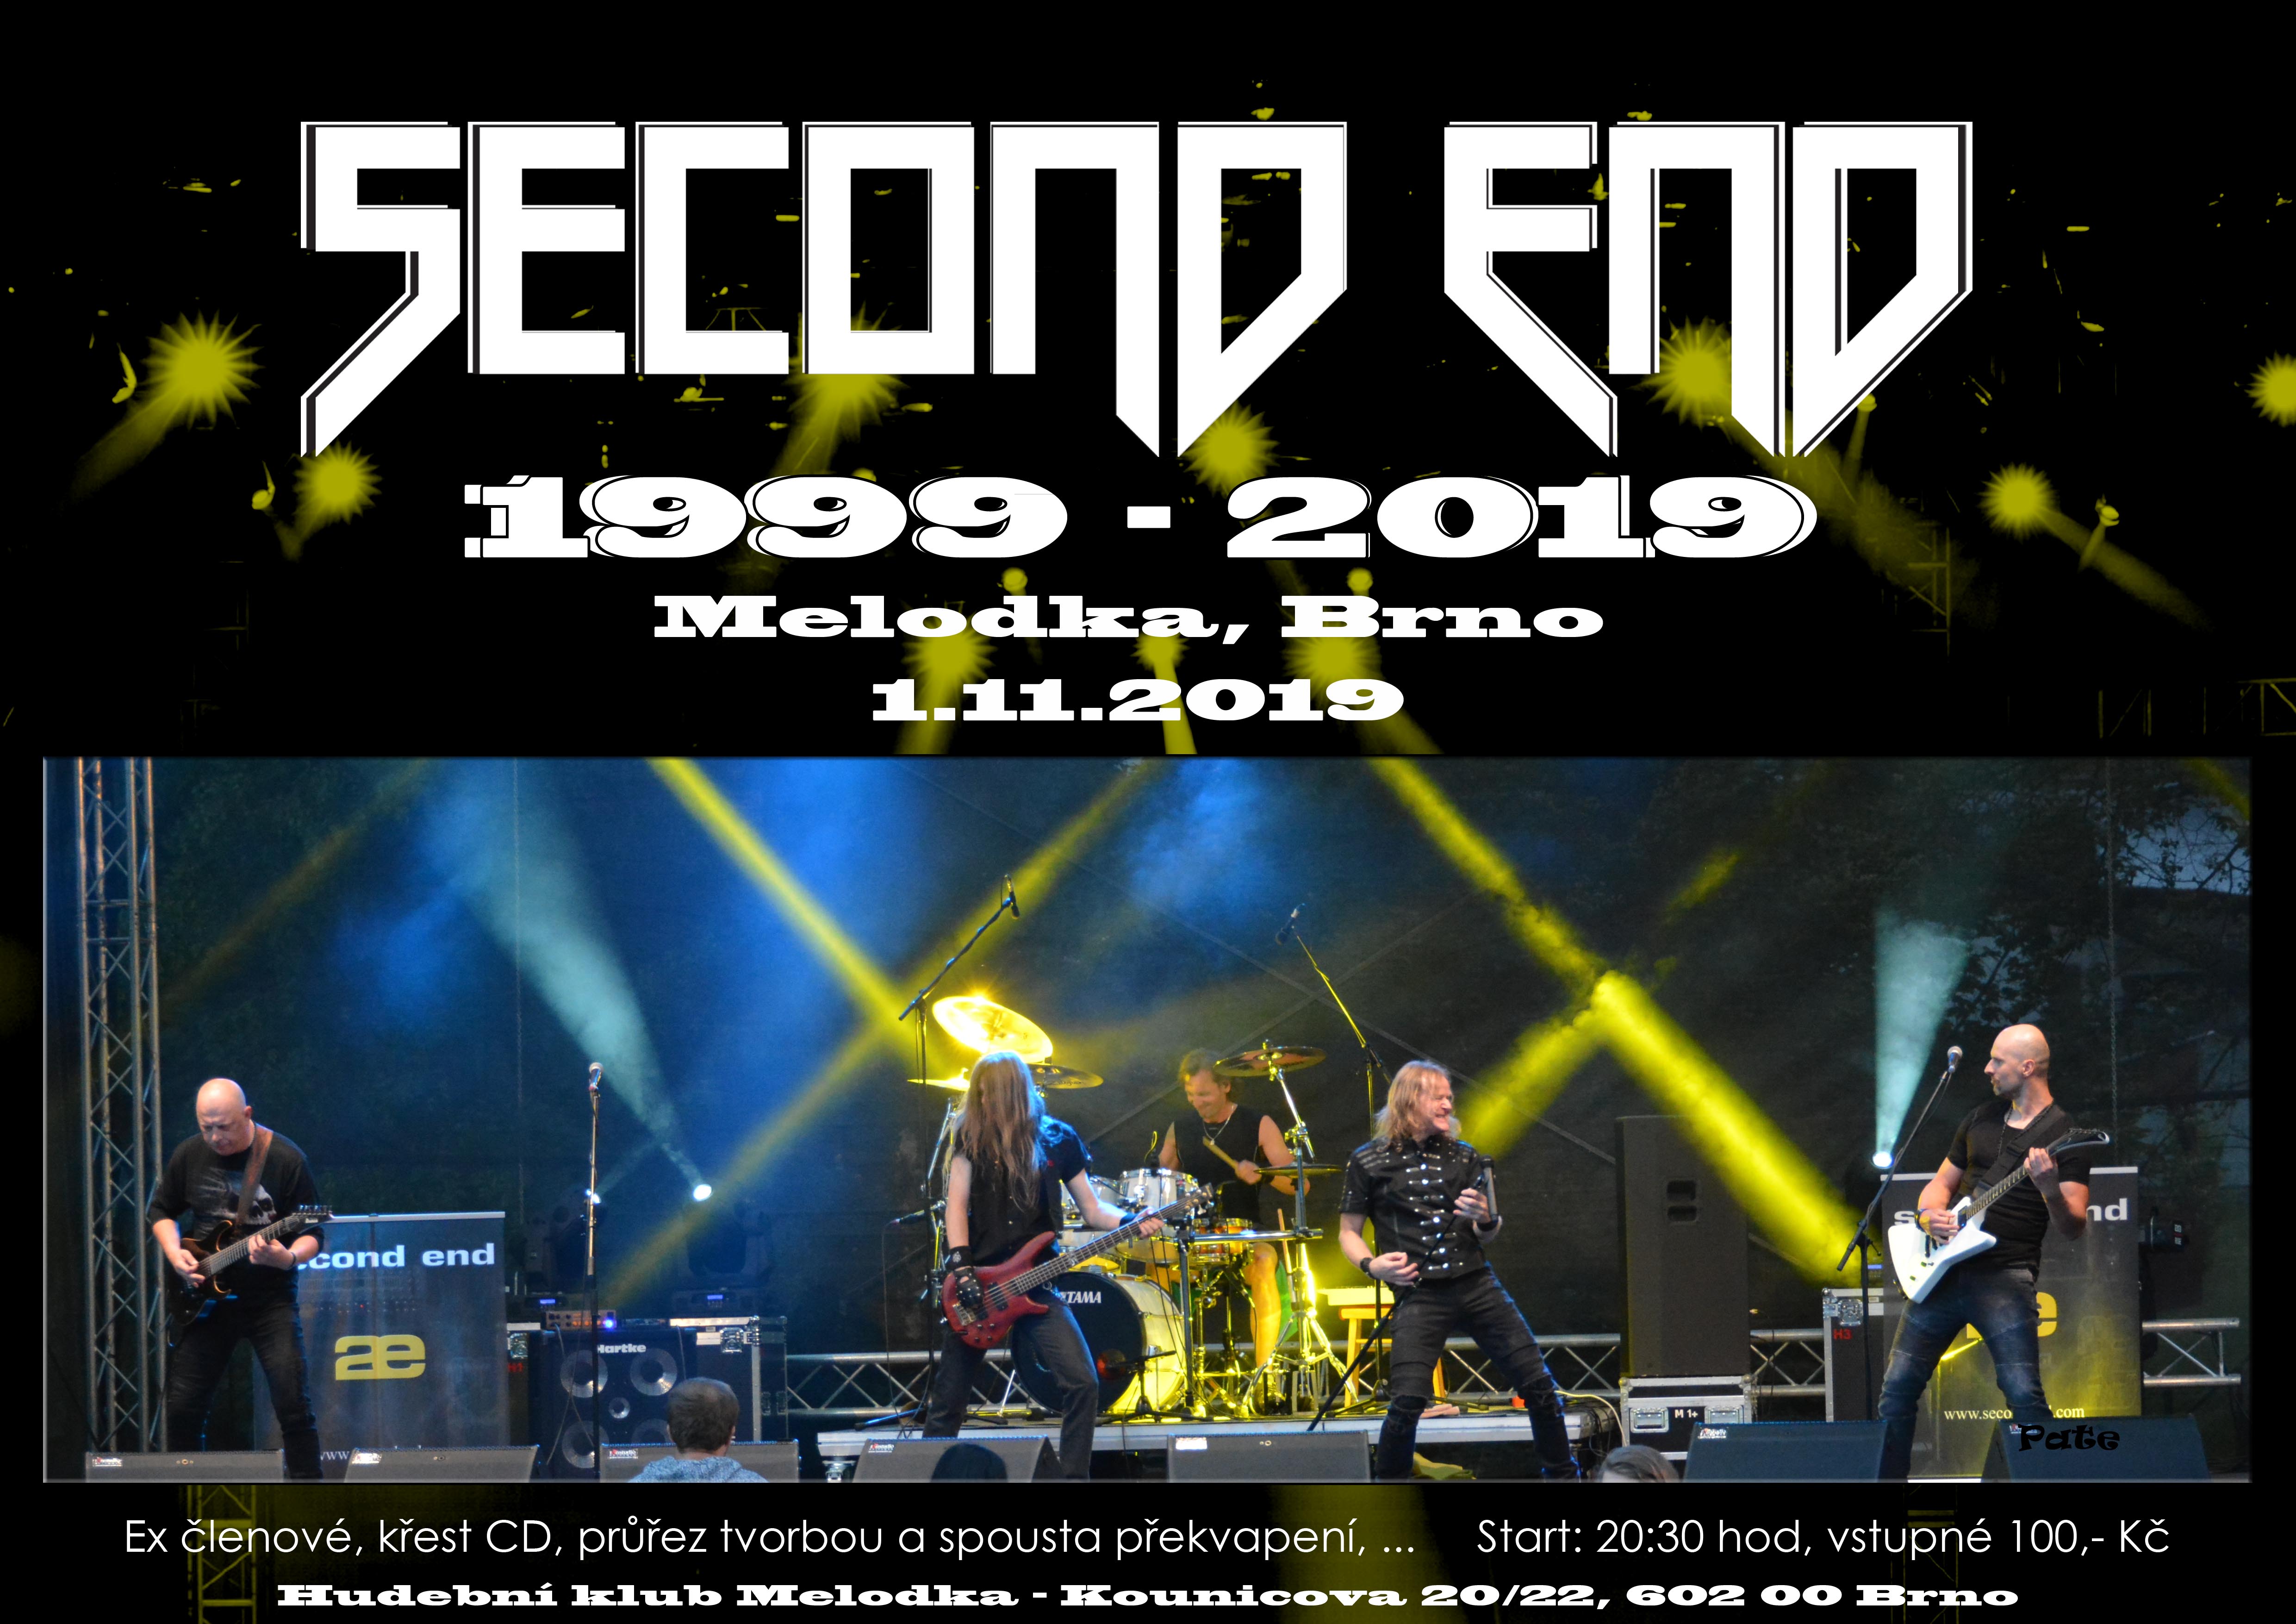 Second End – 1999-2019!!!